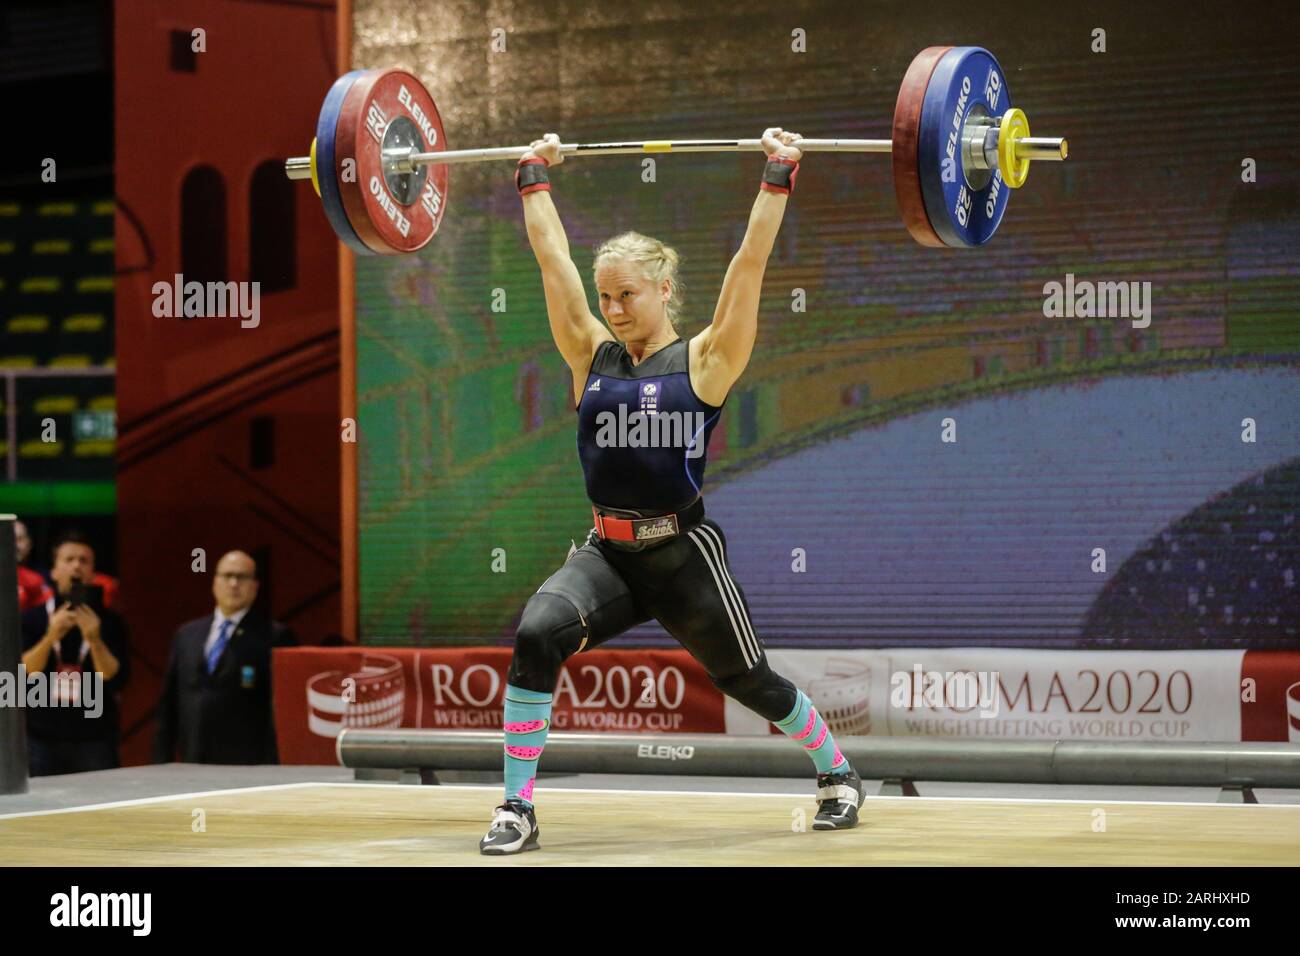 Rome, Italy, 28 Jan 2020, saarhelo marianne (fin) 59 kg category during IWF Weightlifting World Cup 2020 - Weightlifting - Credit: LPS/Claudio Bosco/Alamy Live News Stock Photo